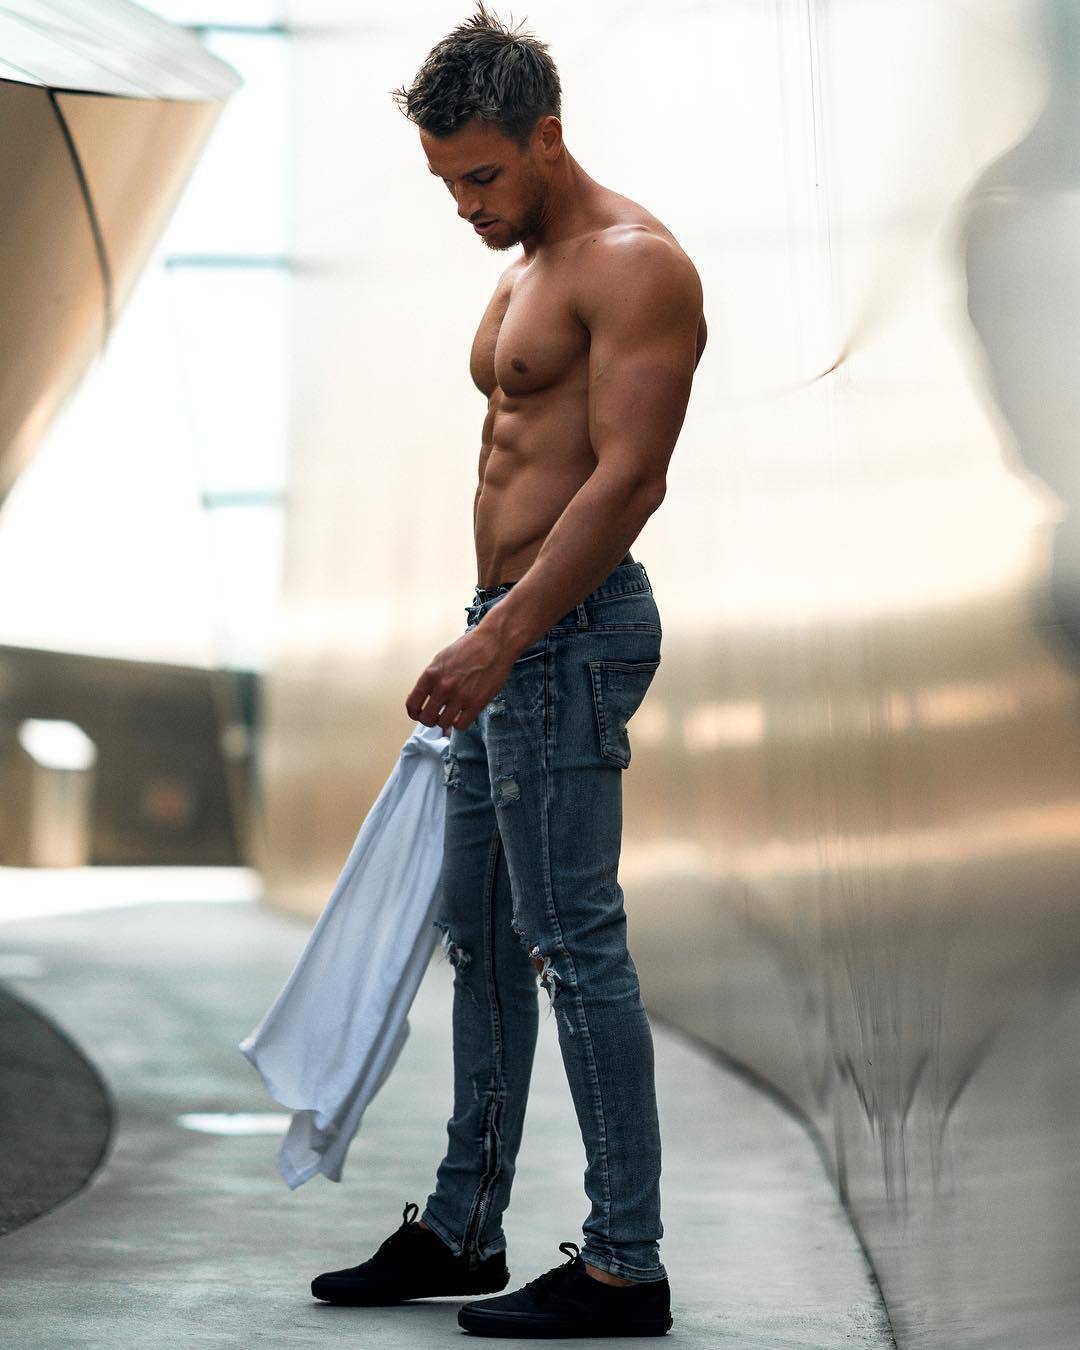 sexy-guys-jeans-shirtless-fit-body-muscle-pecs-abs